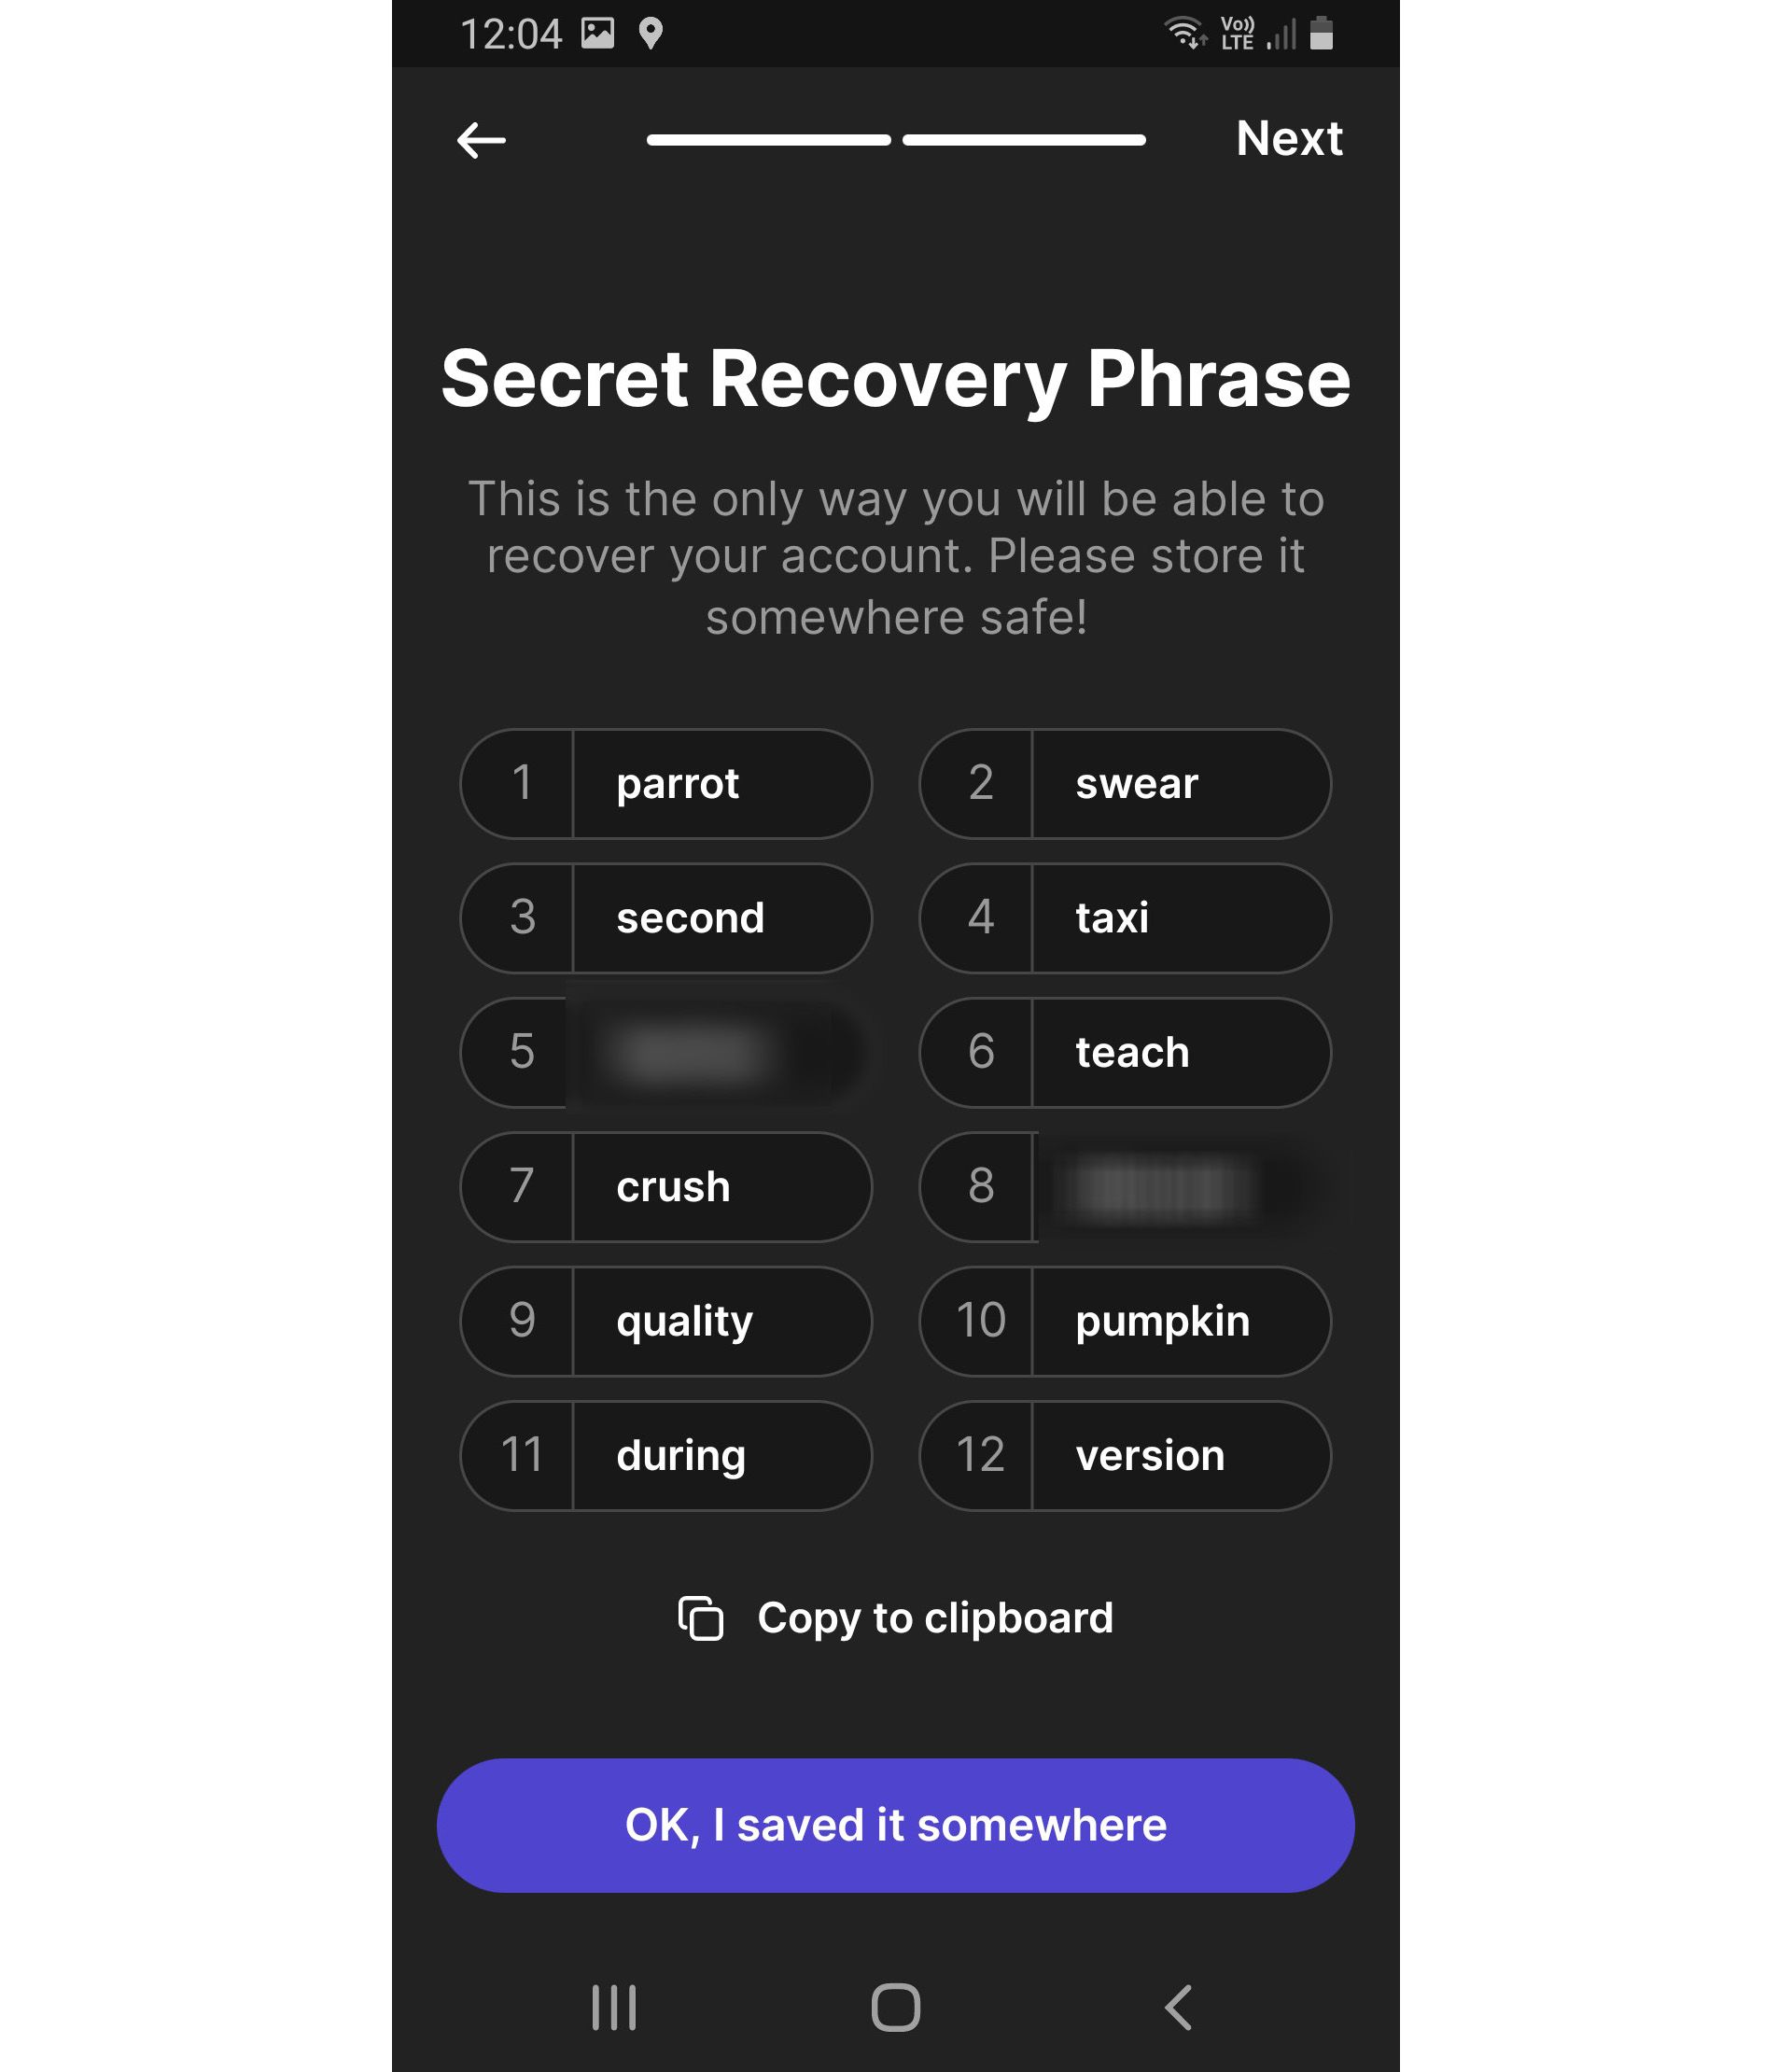 Screenshot from Phantom wallet showing 12 words that the user must record somewhere